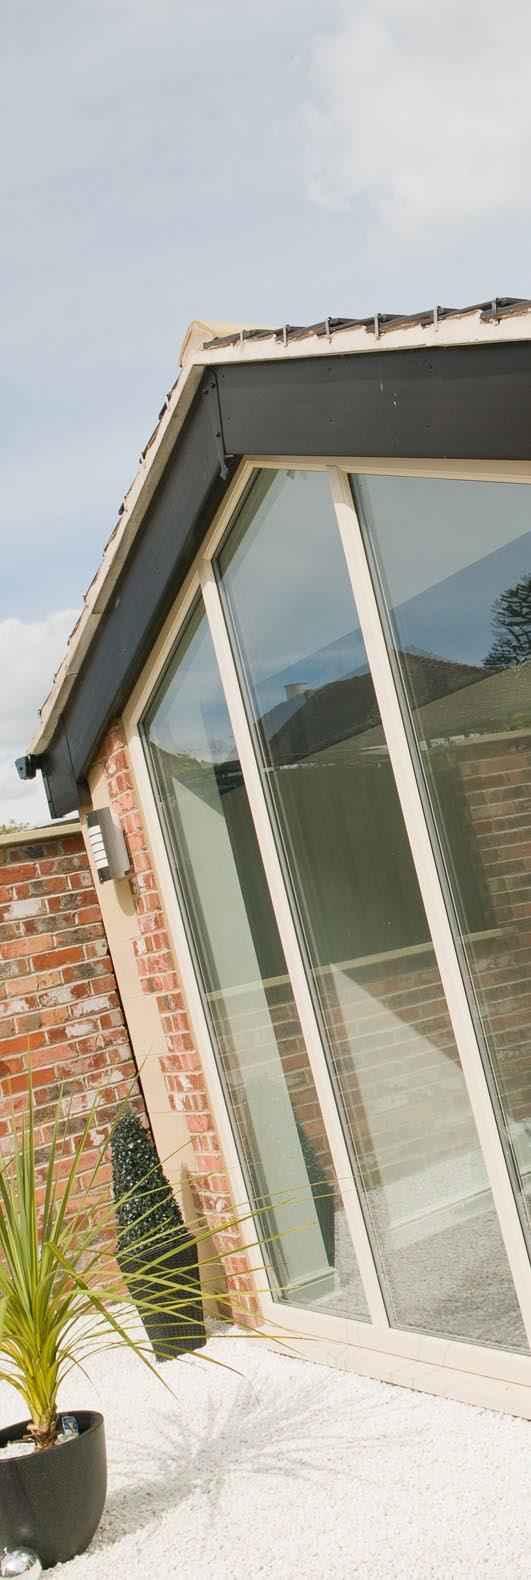 Conservatories Liniar does not advise accessing a conservatory roof without the use of scaffolding or platforms. Never lean ladders against PVCu frames, gutters or glass as this may result in damage.